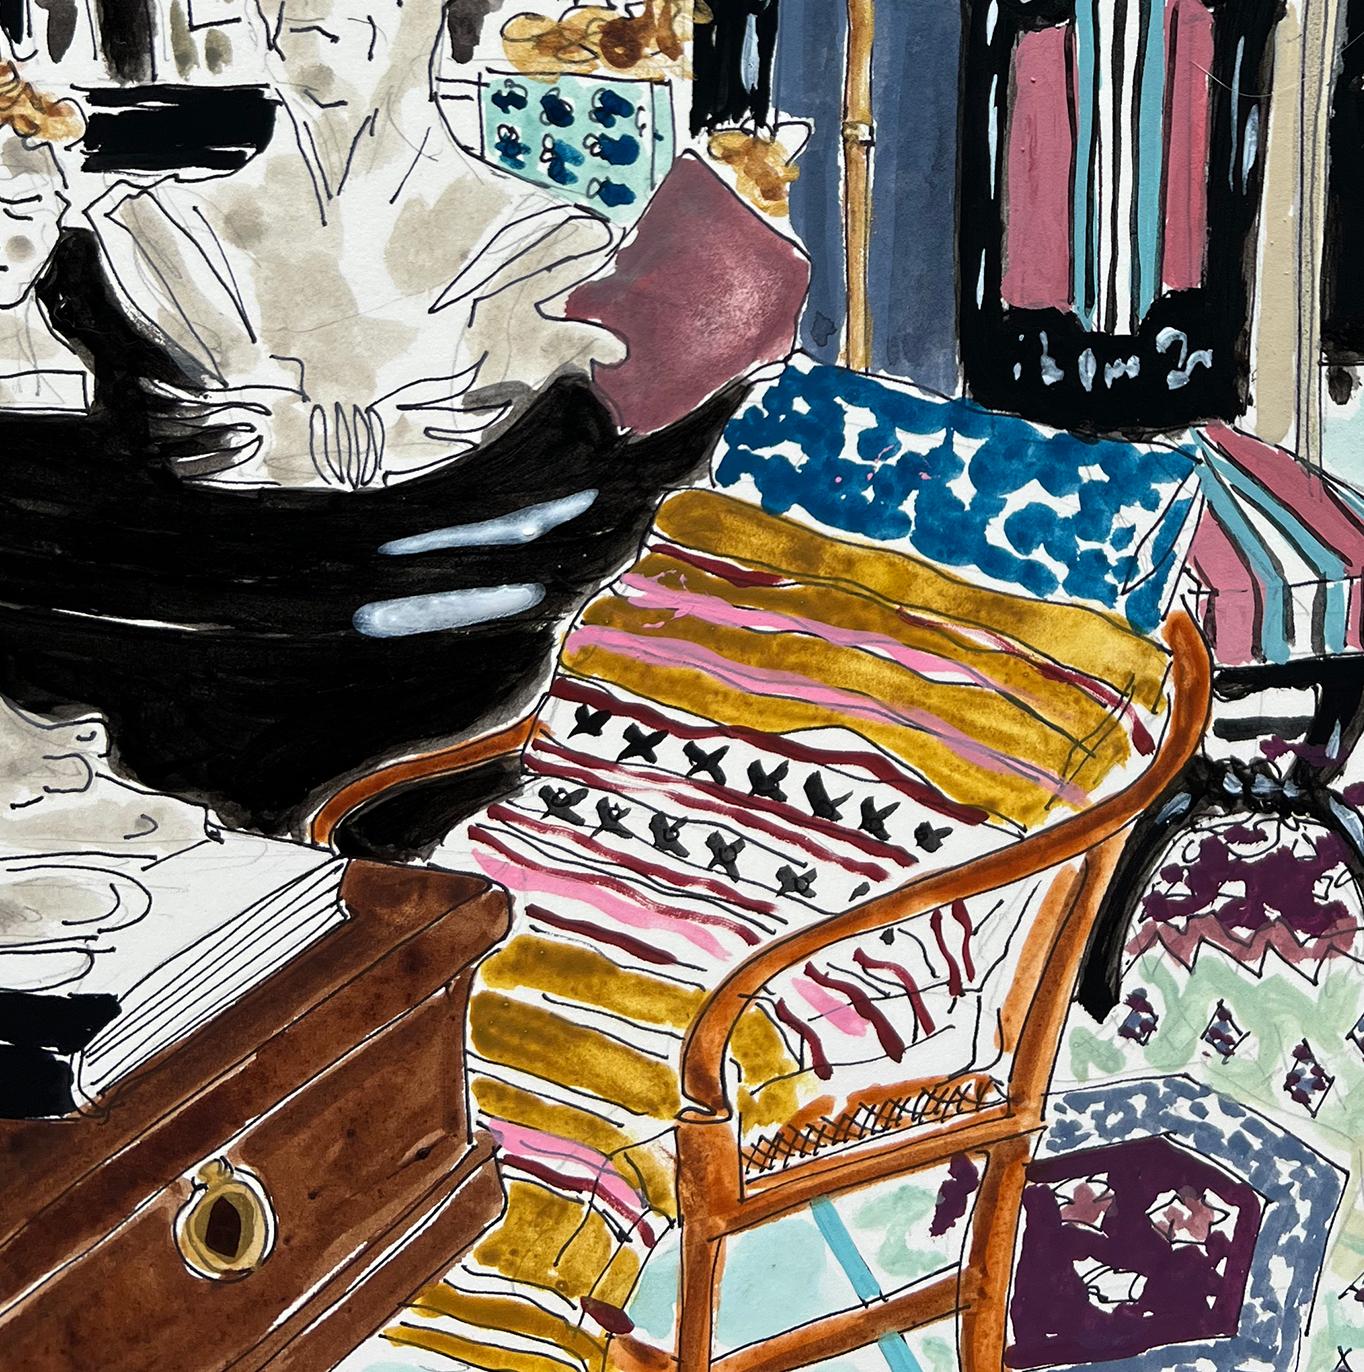 Umberto Pasti Blue Room by Manuel Santelices 
Ink, watercolor and gouache on paper
Image size: 14